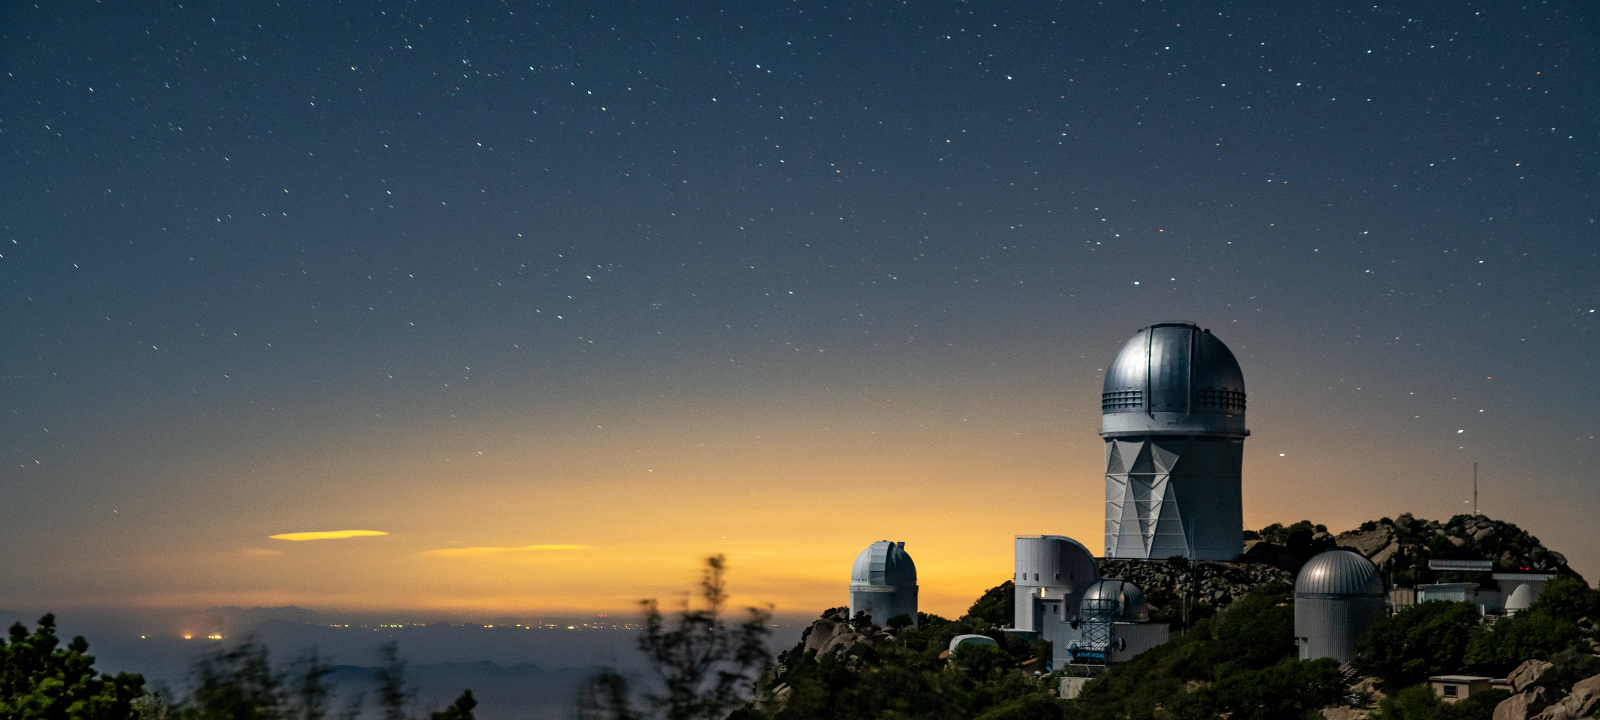 Photo - A view of the Mayall Telescope (tallest structure) at Kitt Peak National Observatory near Tucson. The Dark Energy Spectroscopic Instrument is housed within the Mayall dome. (Credit: Marilyn Sargent/Berkeley Lab)